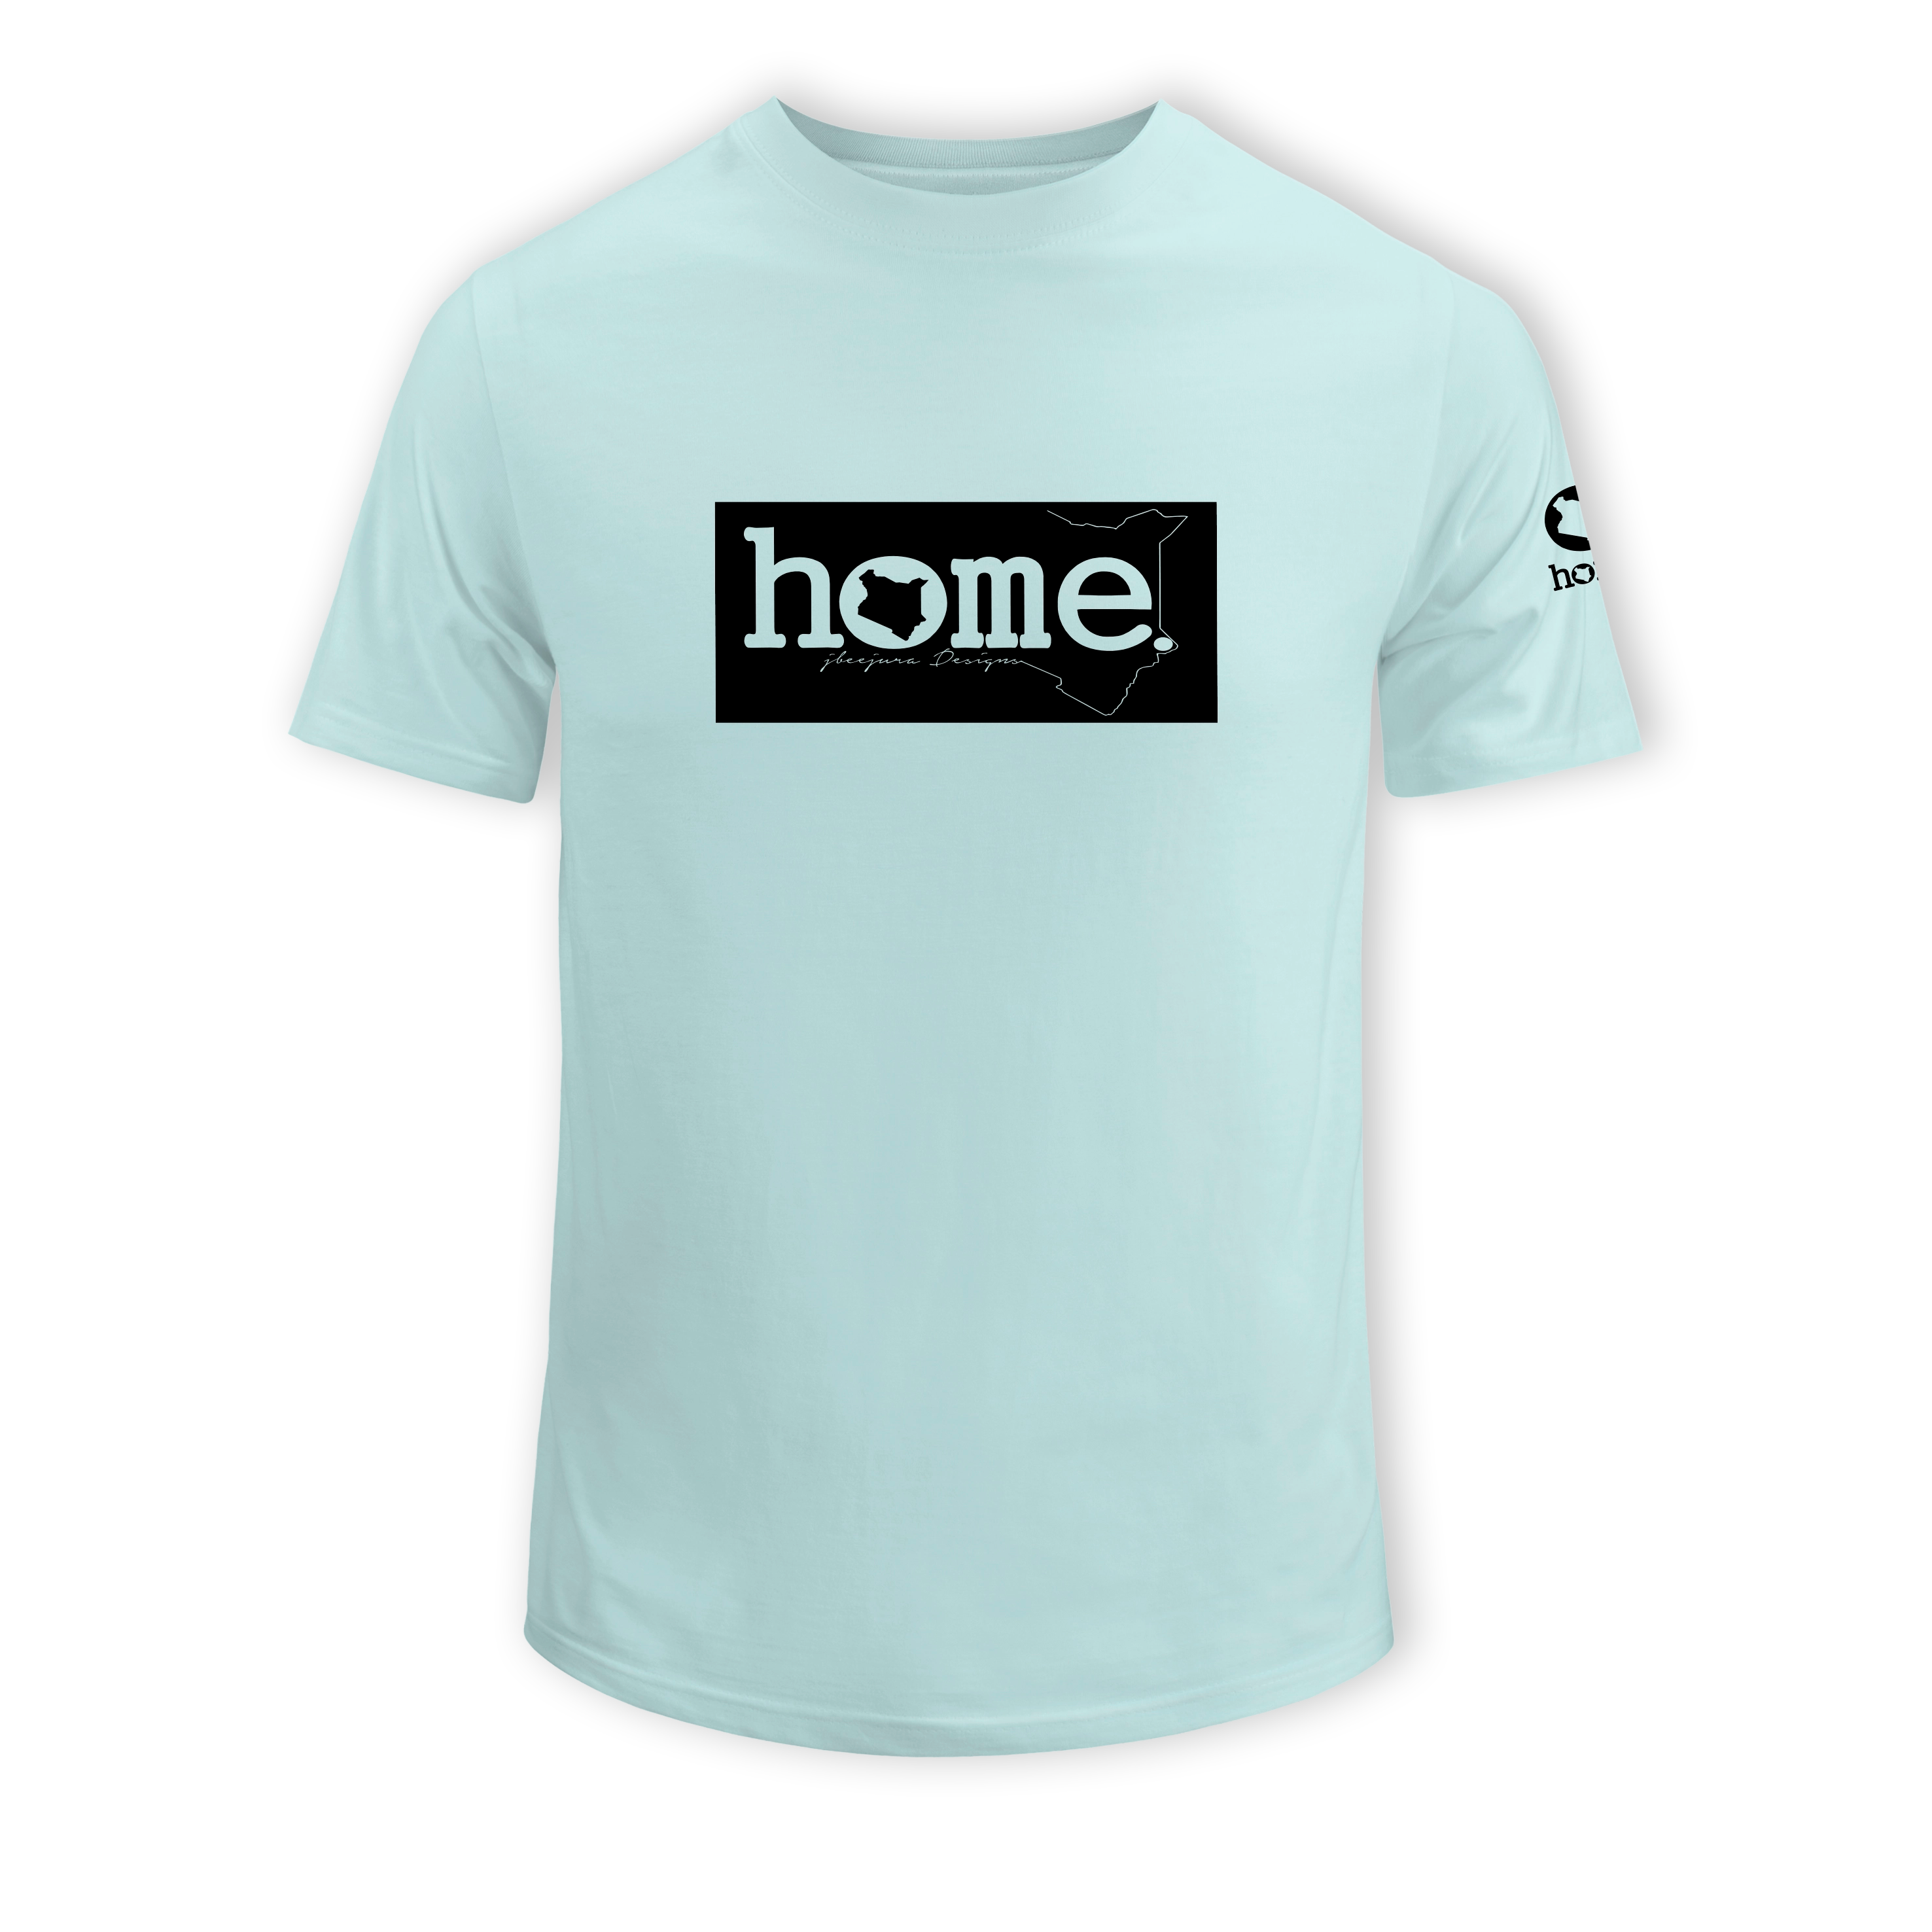 home_254 KIDS SHORT-SLEEVED MISTY BLUE T-SHIRT WITH A BLACK CLASSIC PRINT – COTTON PLUS FABRIC